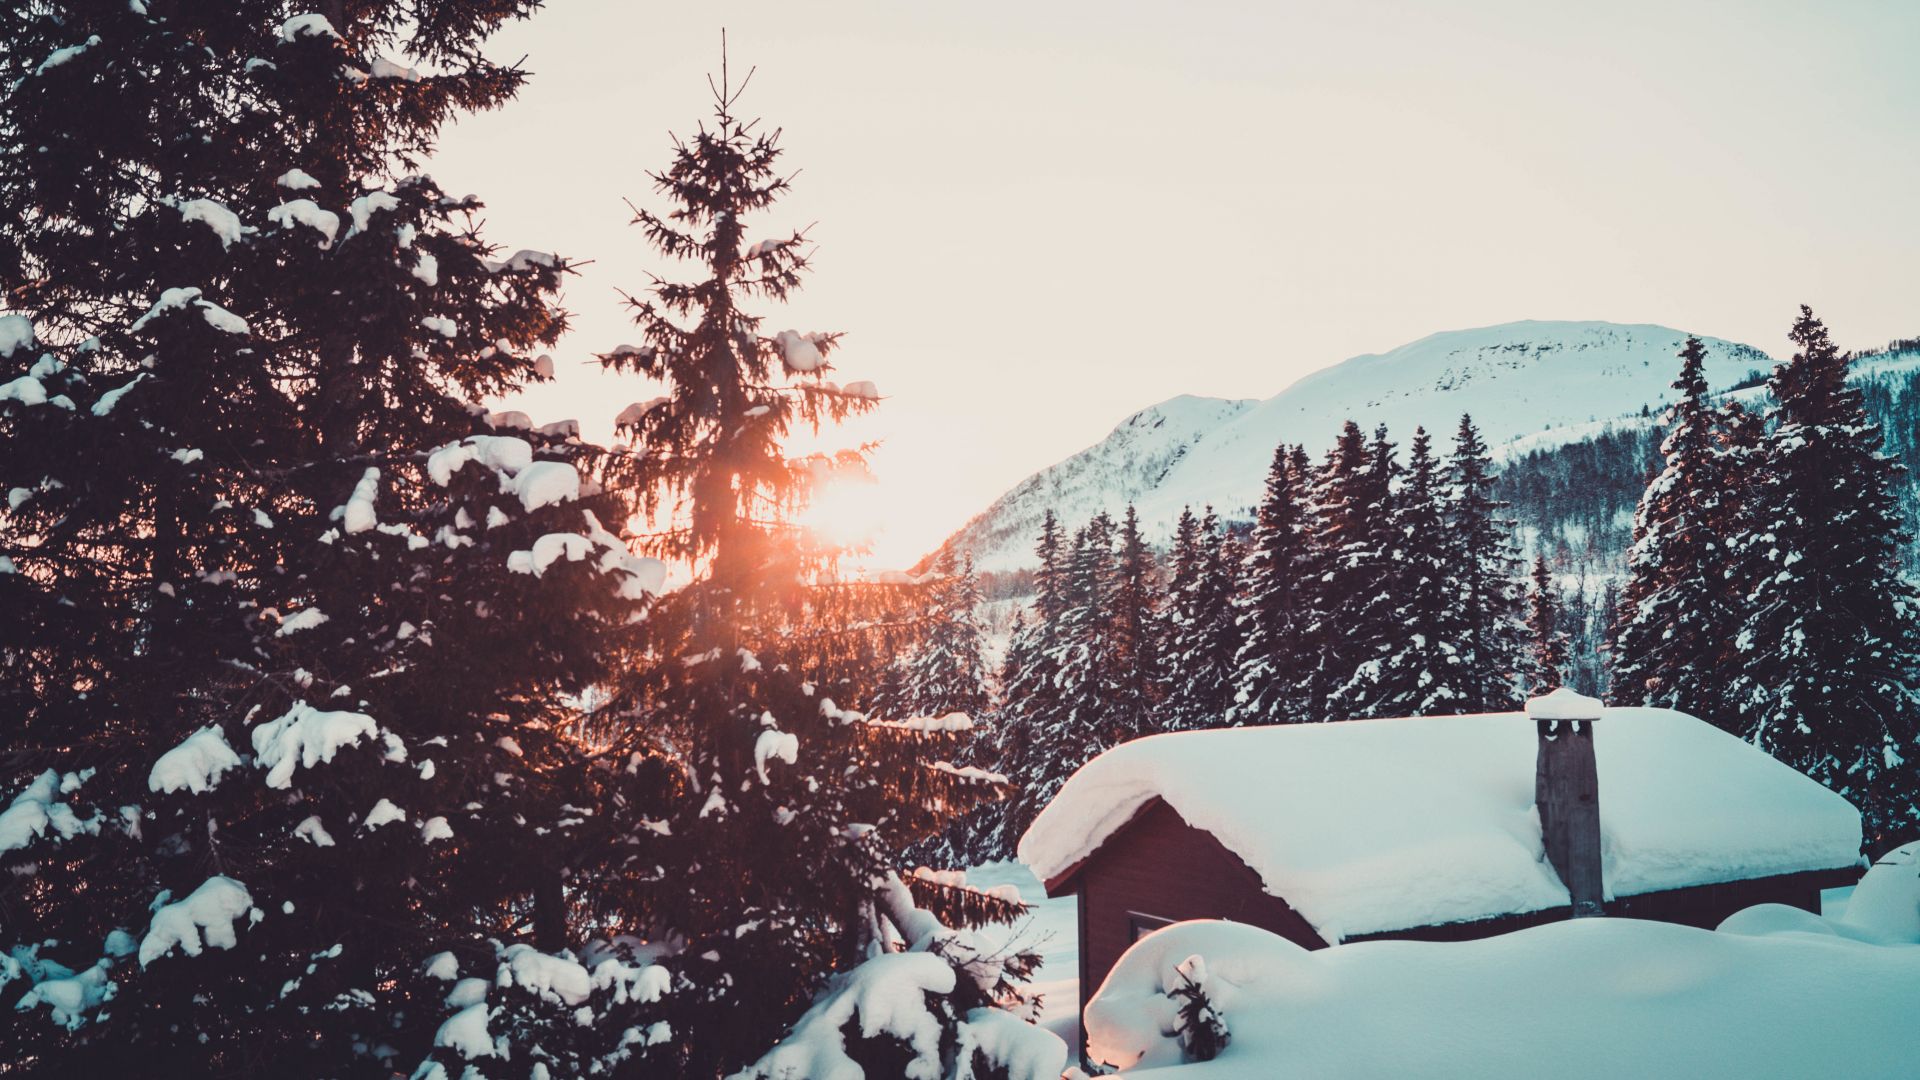 Desktop wallpapers cabin, winter, snowfall, tree and mountains, sunrise, hd...